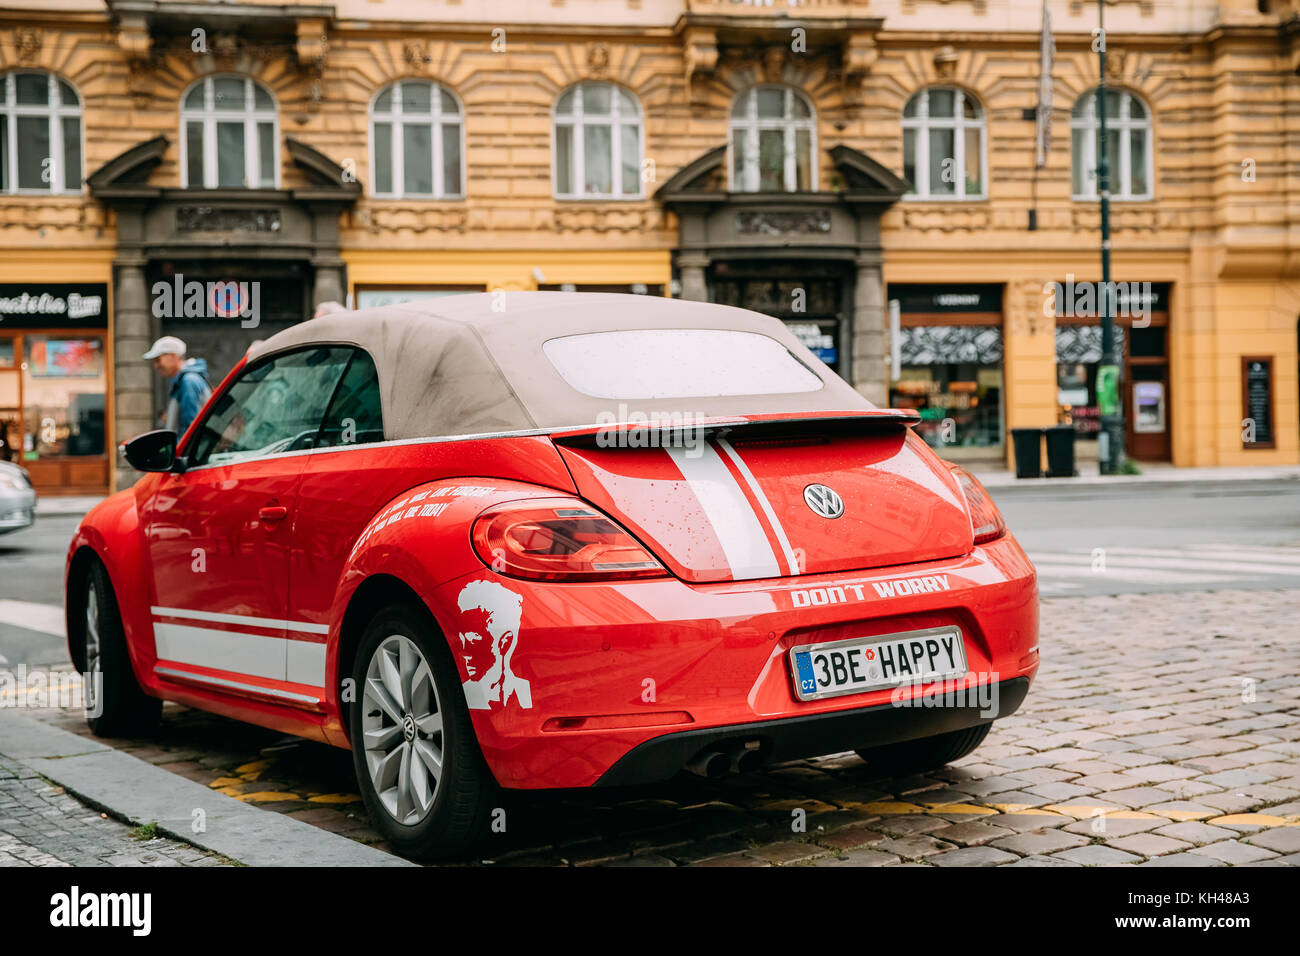 Prague, Czech Republic - September 24, 2017: Back View Of Red Volkswagen New Beetle Cabriolet Car Parked In Street. Stock Photo